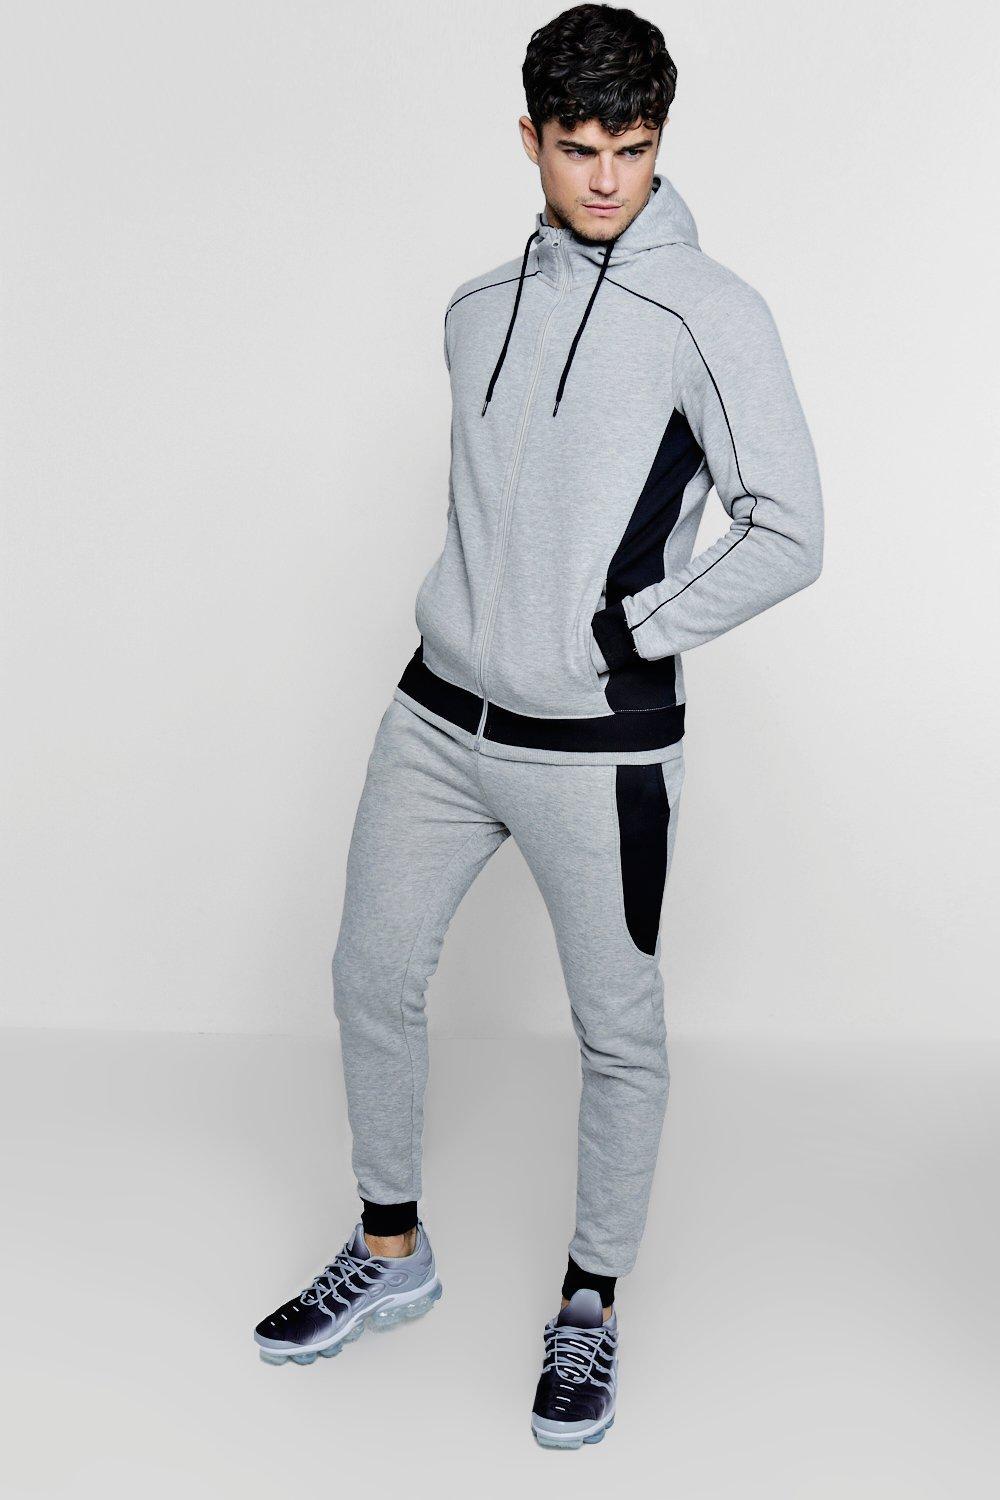 BoohooMAN Side Panel Hooded Tracksuit With Piping in Gray for Men - Lyst